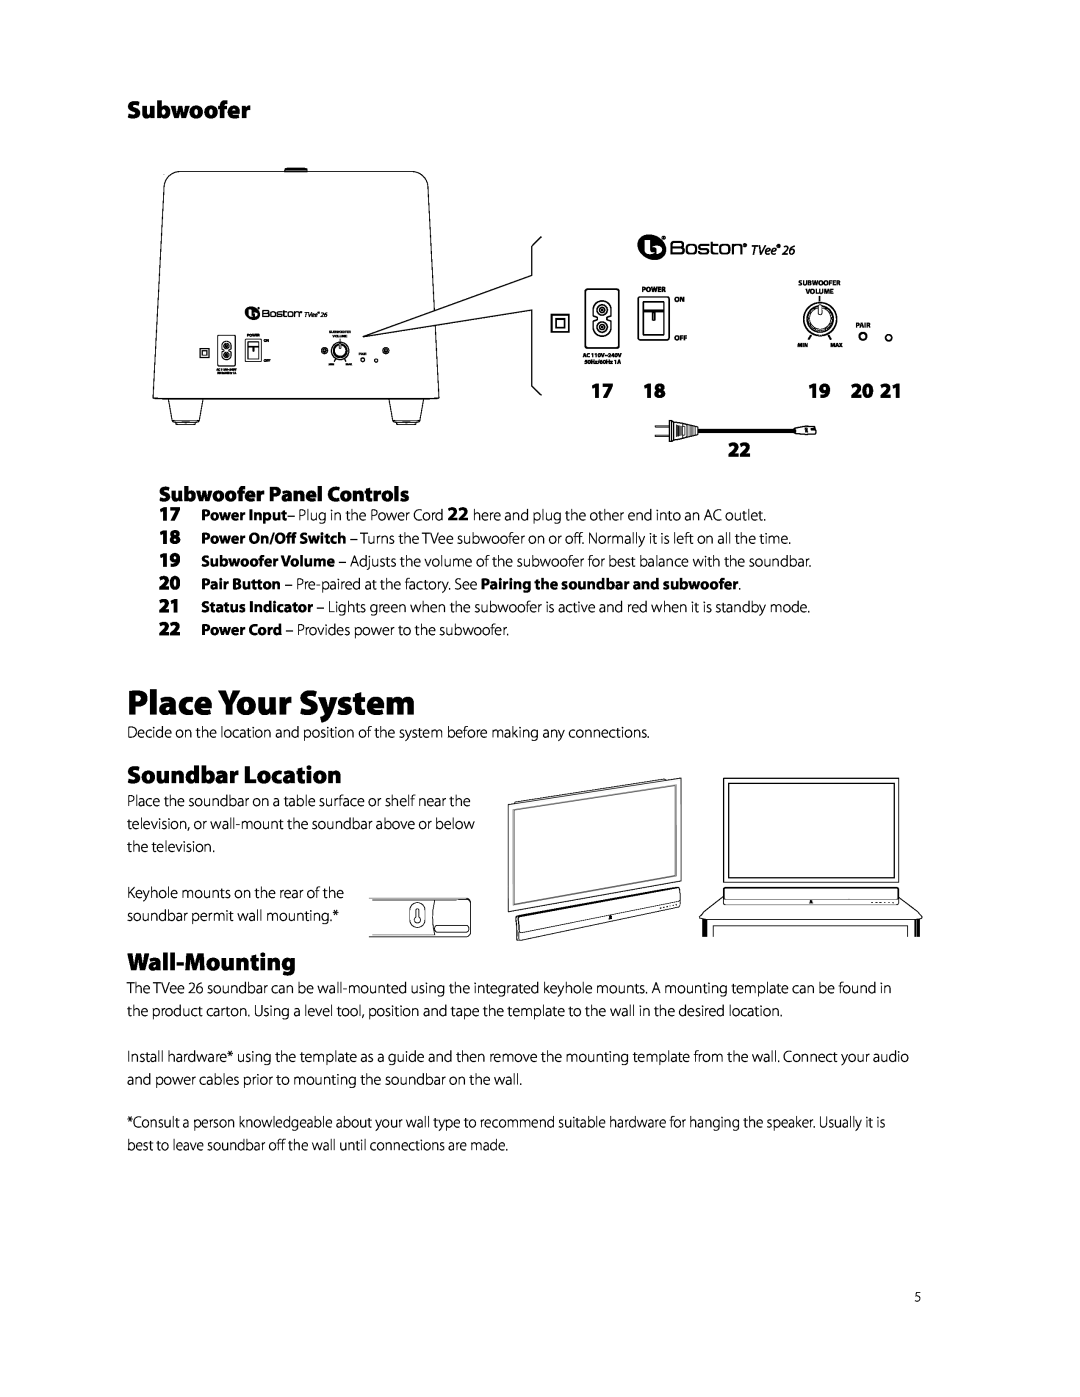 Boston Acoustics TVEEM26B owner manual Place Your System, Soundbar Location, Wall-Mounting, Subwoofer Panel Controls 